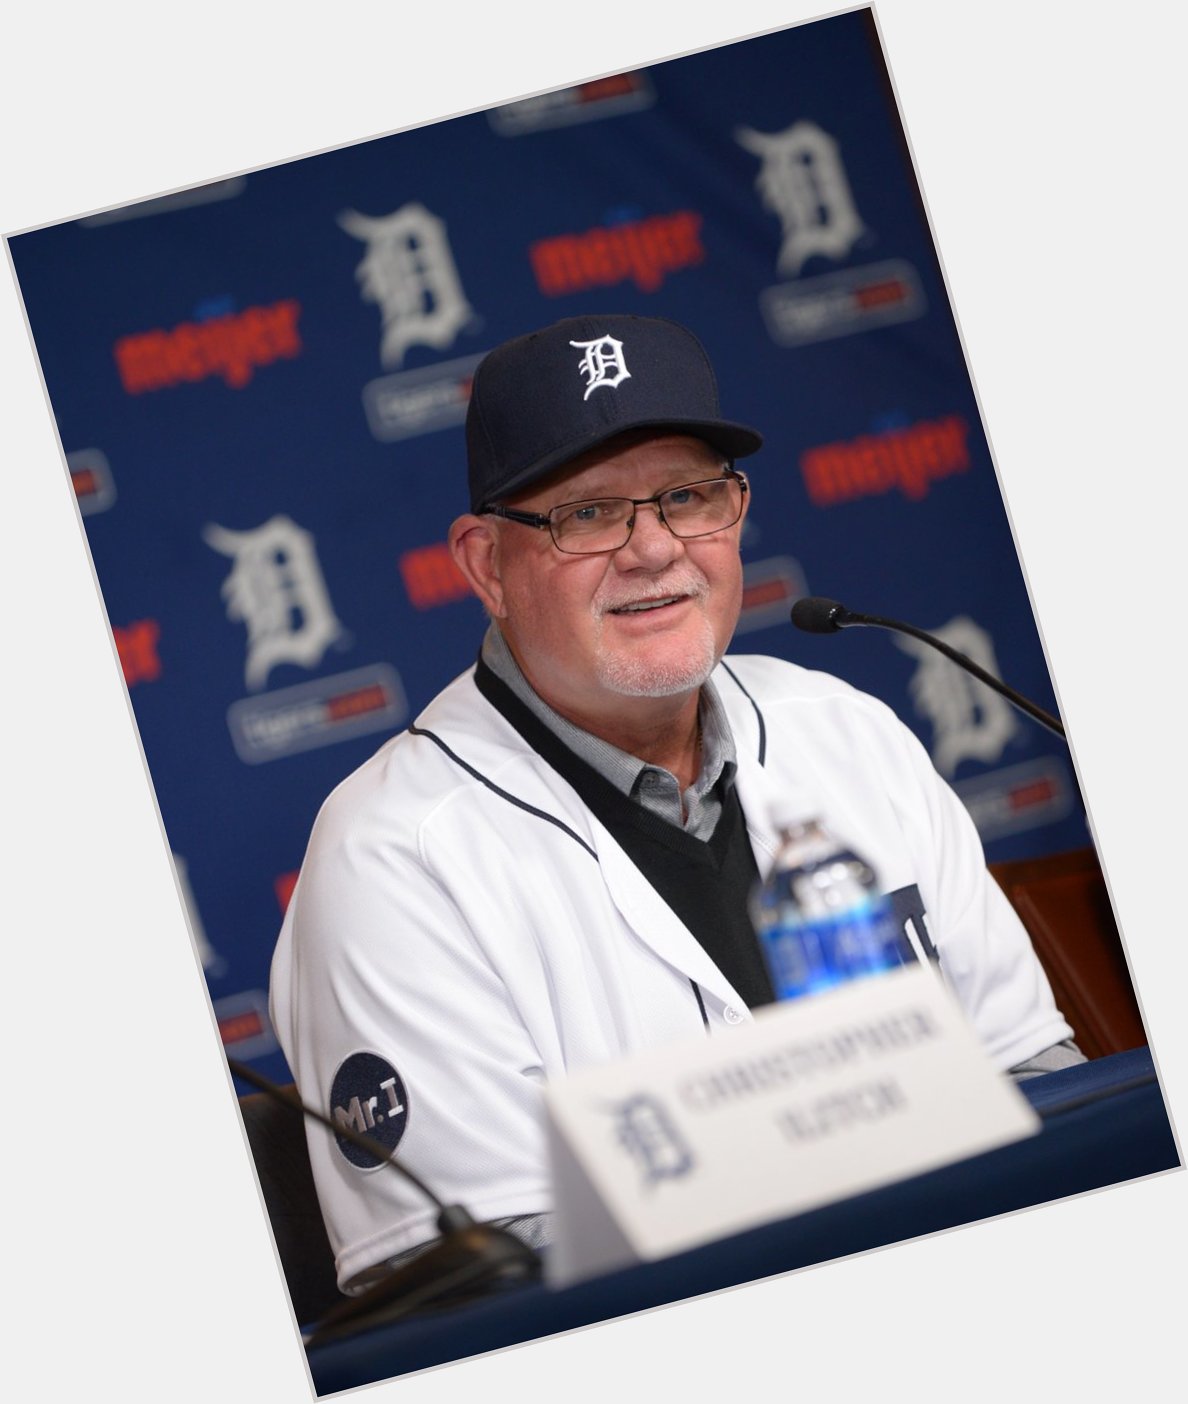 Happy Birthday to new Tigers manager Ron Gardenhire! 